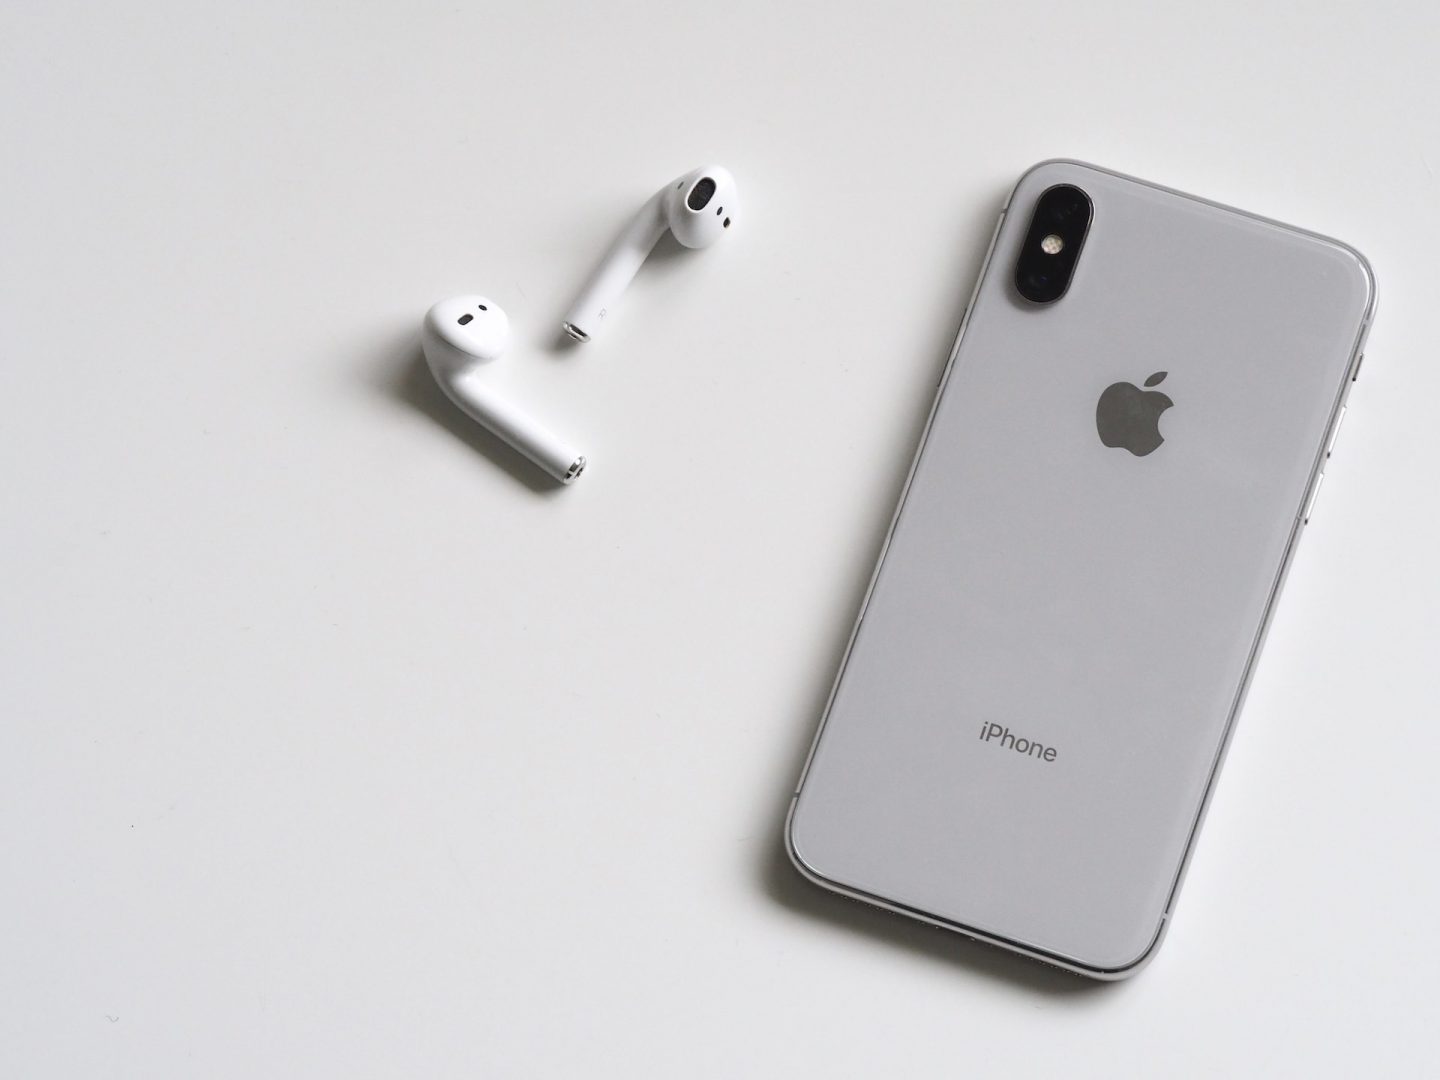 Apple iPhone X white with AirPods